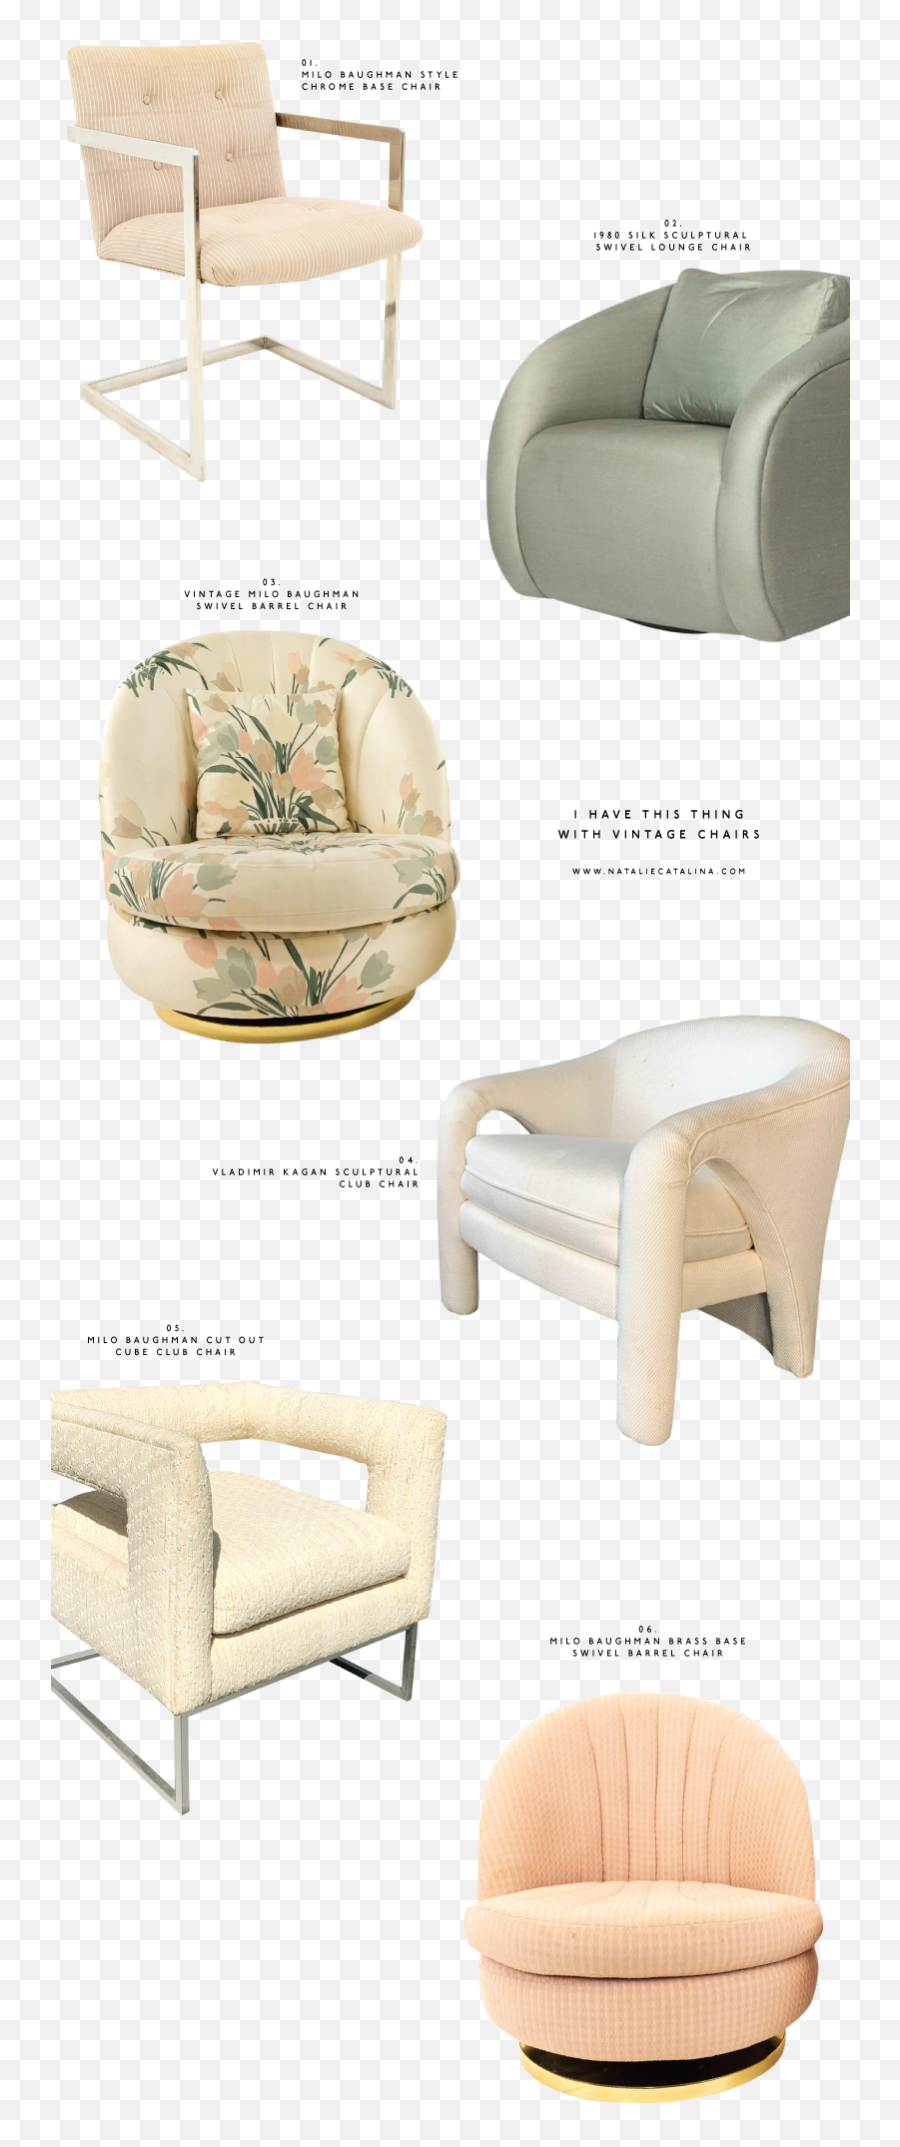 I Have This Thing With Vintage Chairs U2014 Natalie Catalina - Club Chair Png,Chairs Png